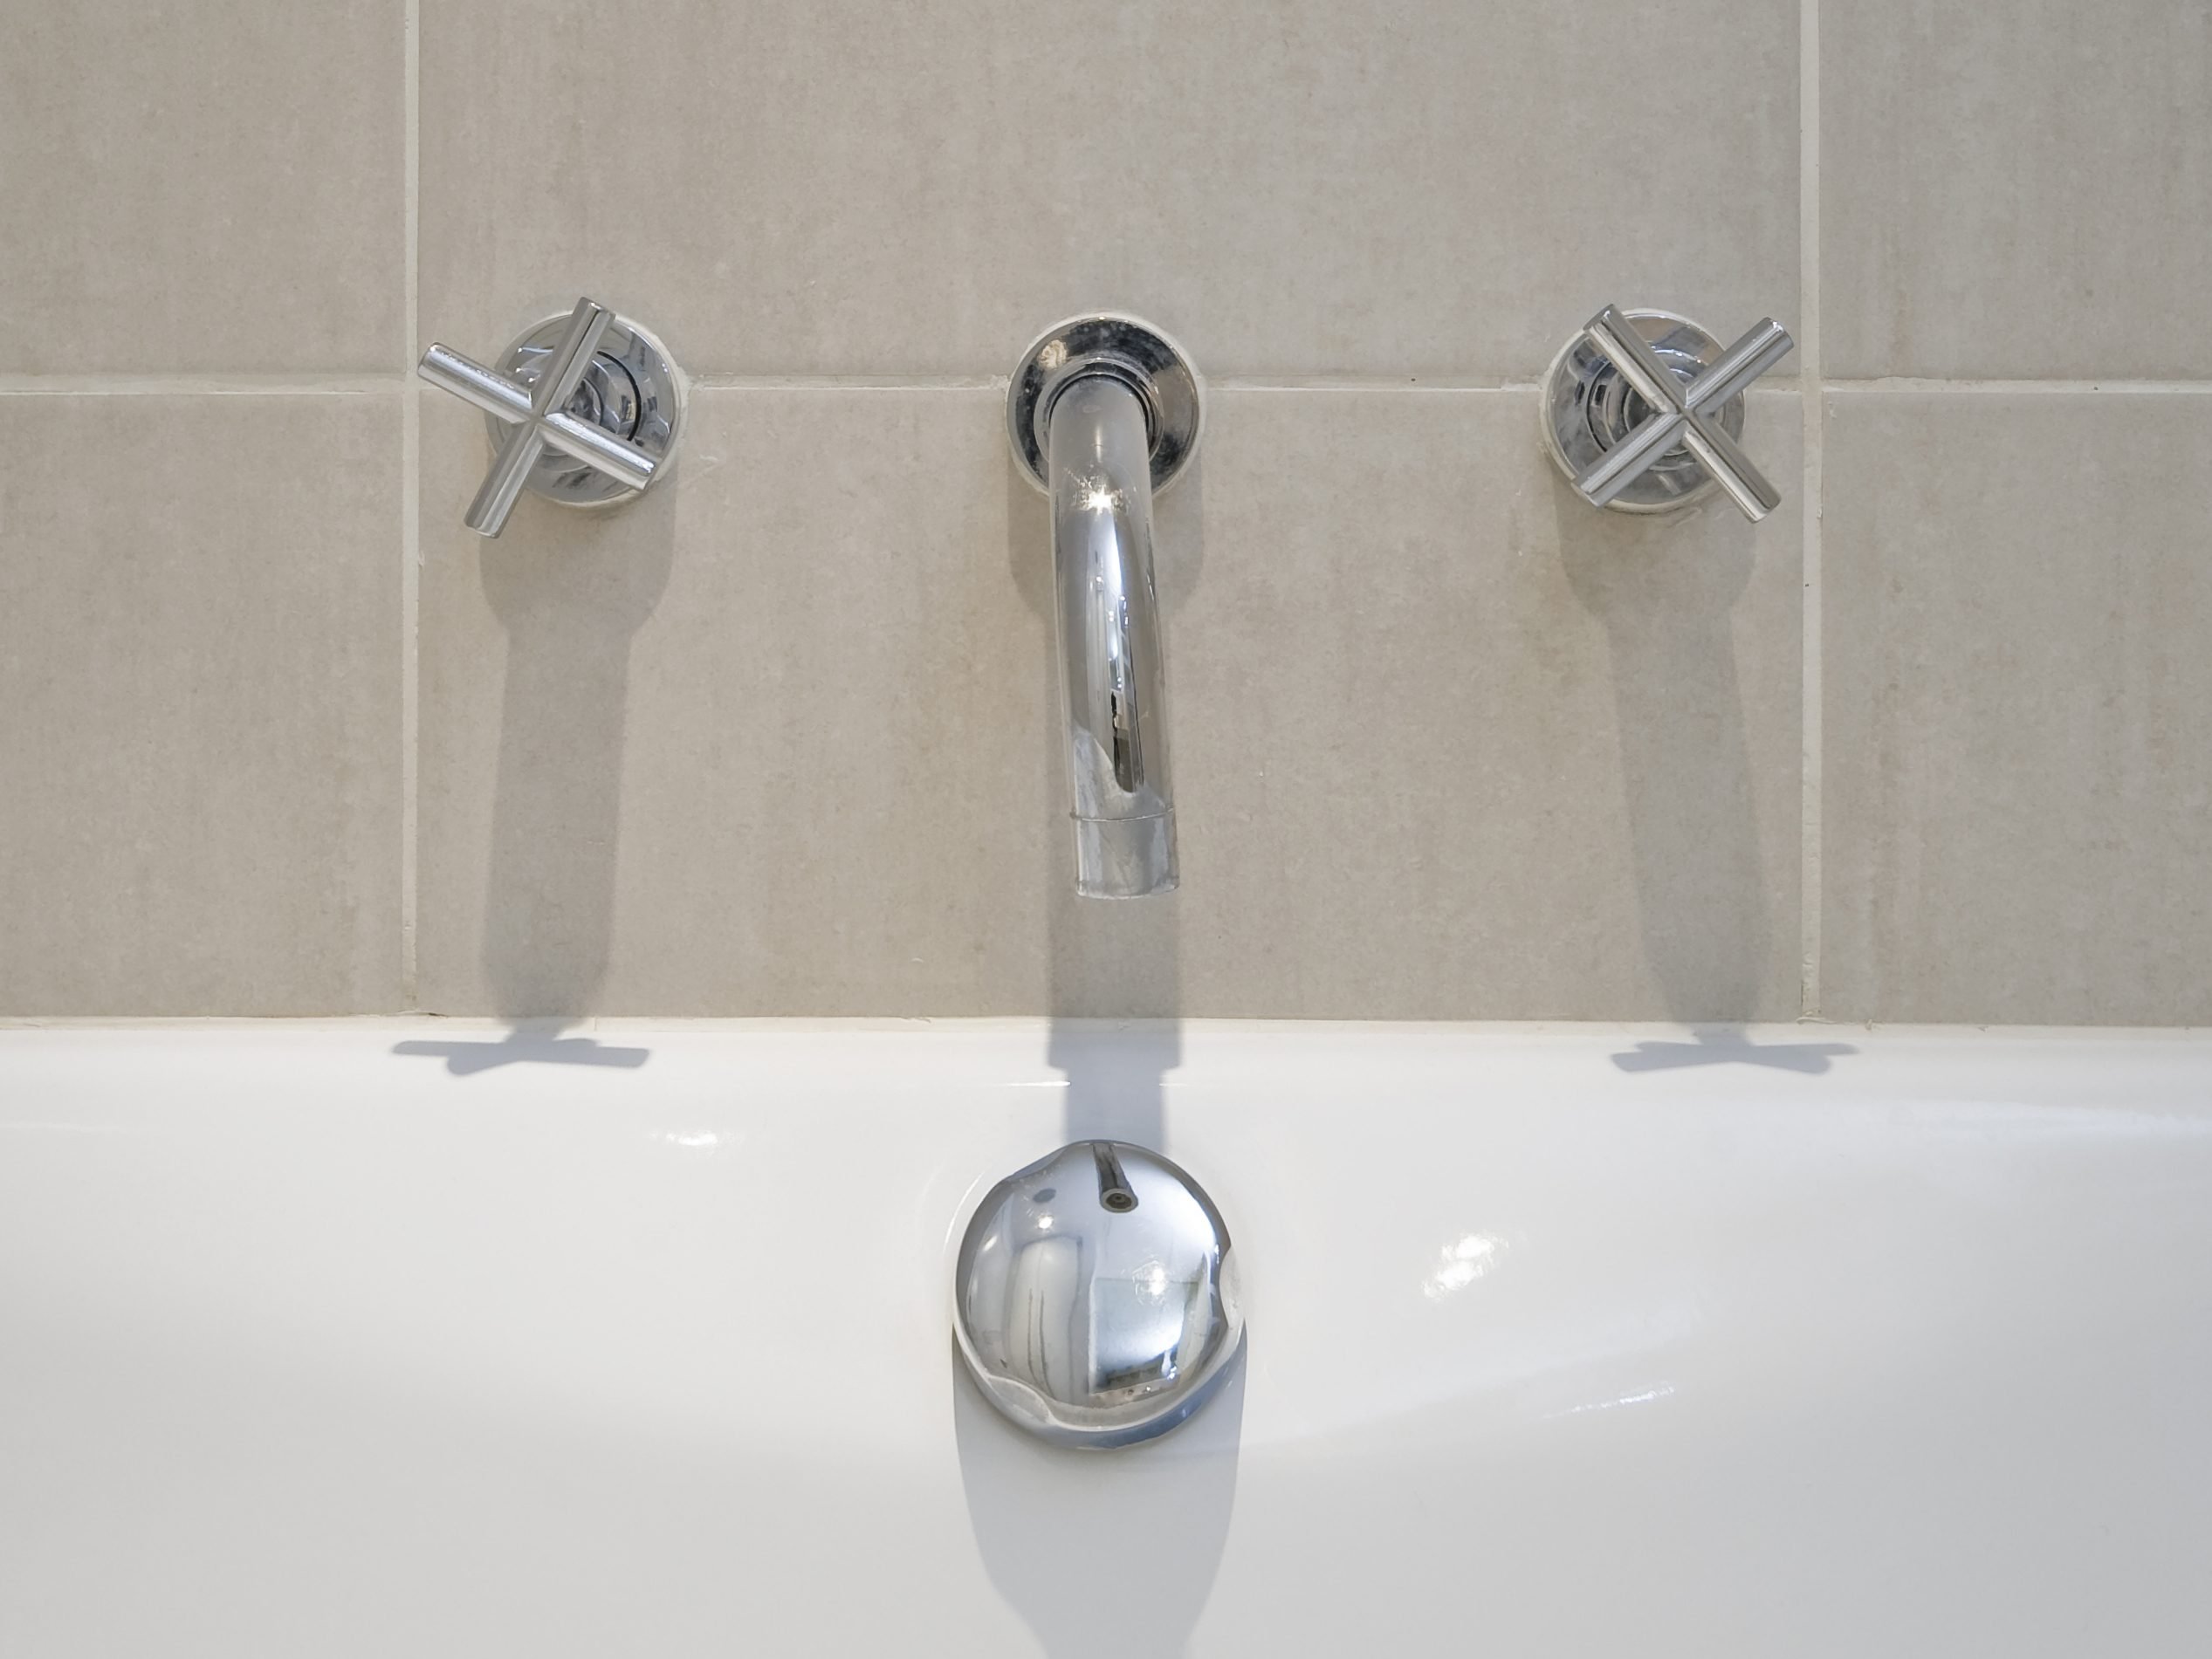 5. Clean the Tub and Faucets with Shampoo